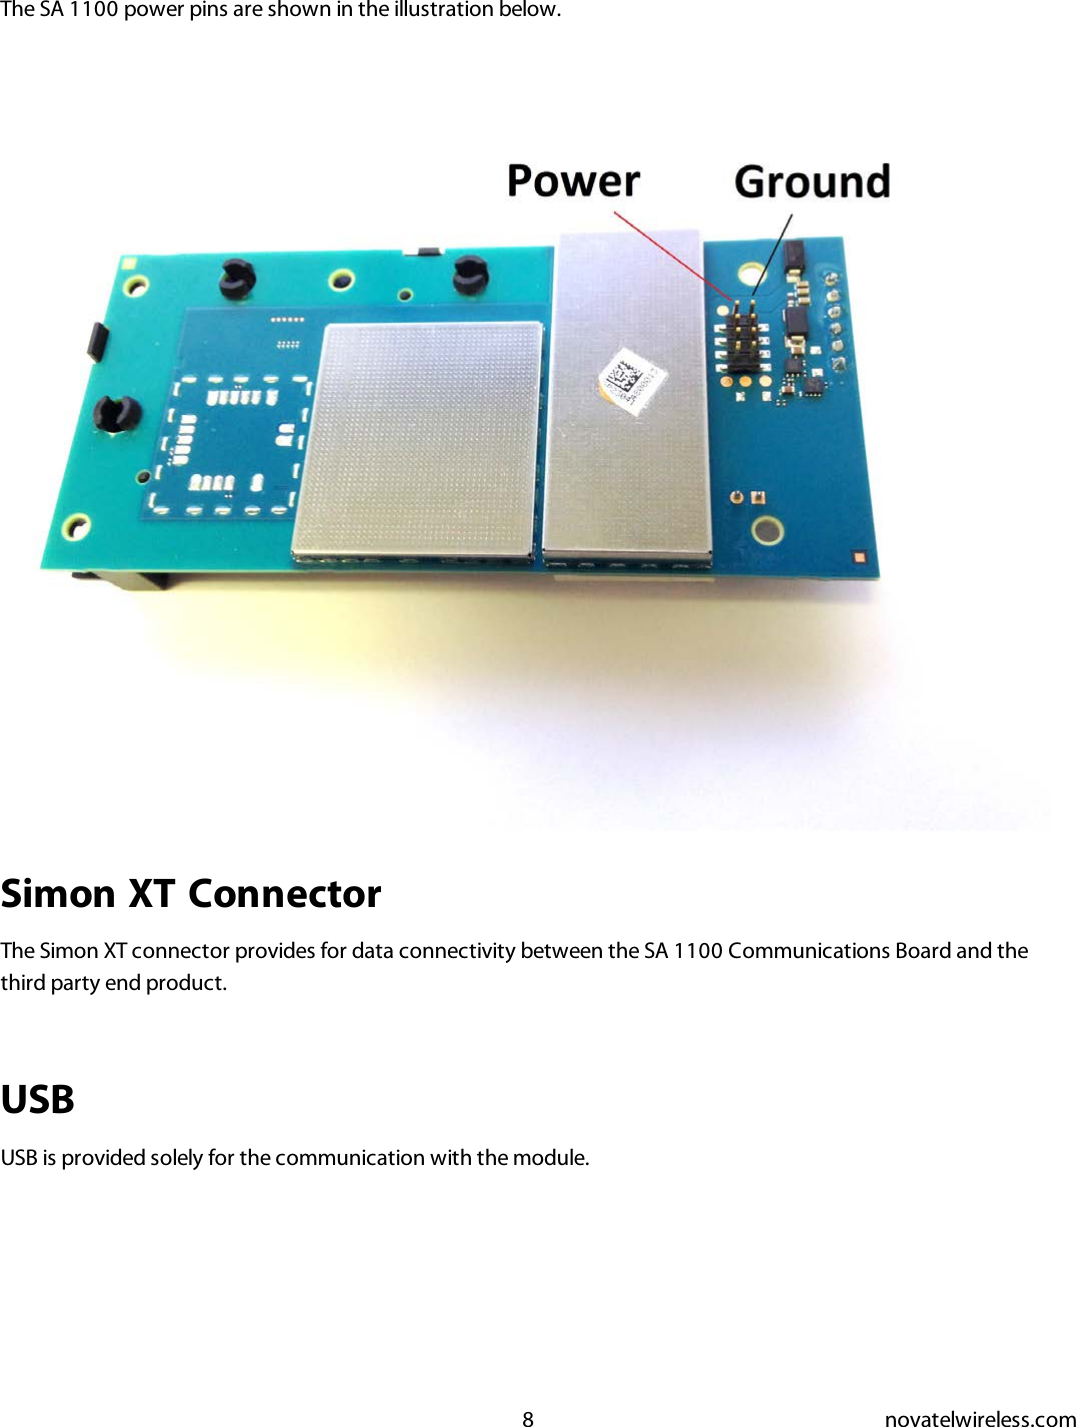 8 novatelwireless.comThe SA 1100 power pins are shown in the illustration below.Simon XT ConnectorThe Simon XT connector provides for data connectivity between the SA 1100 Communications Board and thethird party end product.USBUSB is provided solely for the communication with the module.